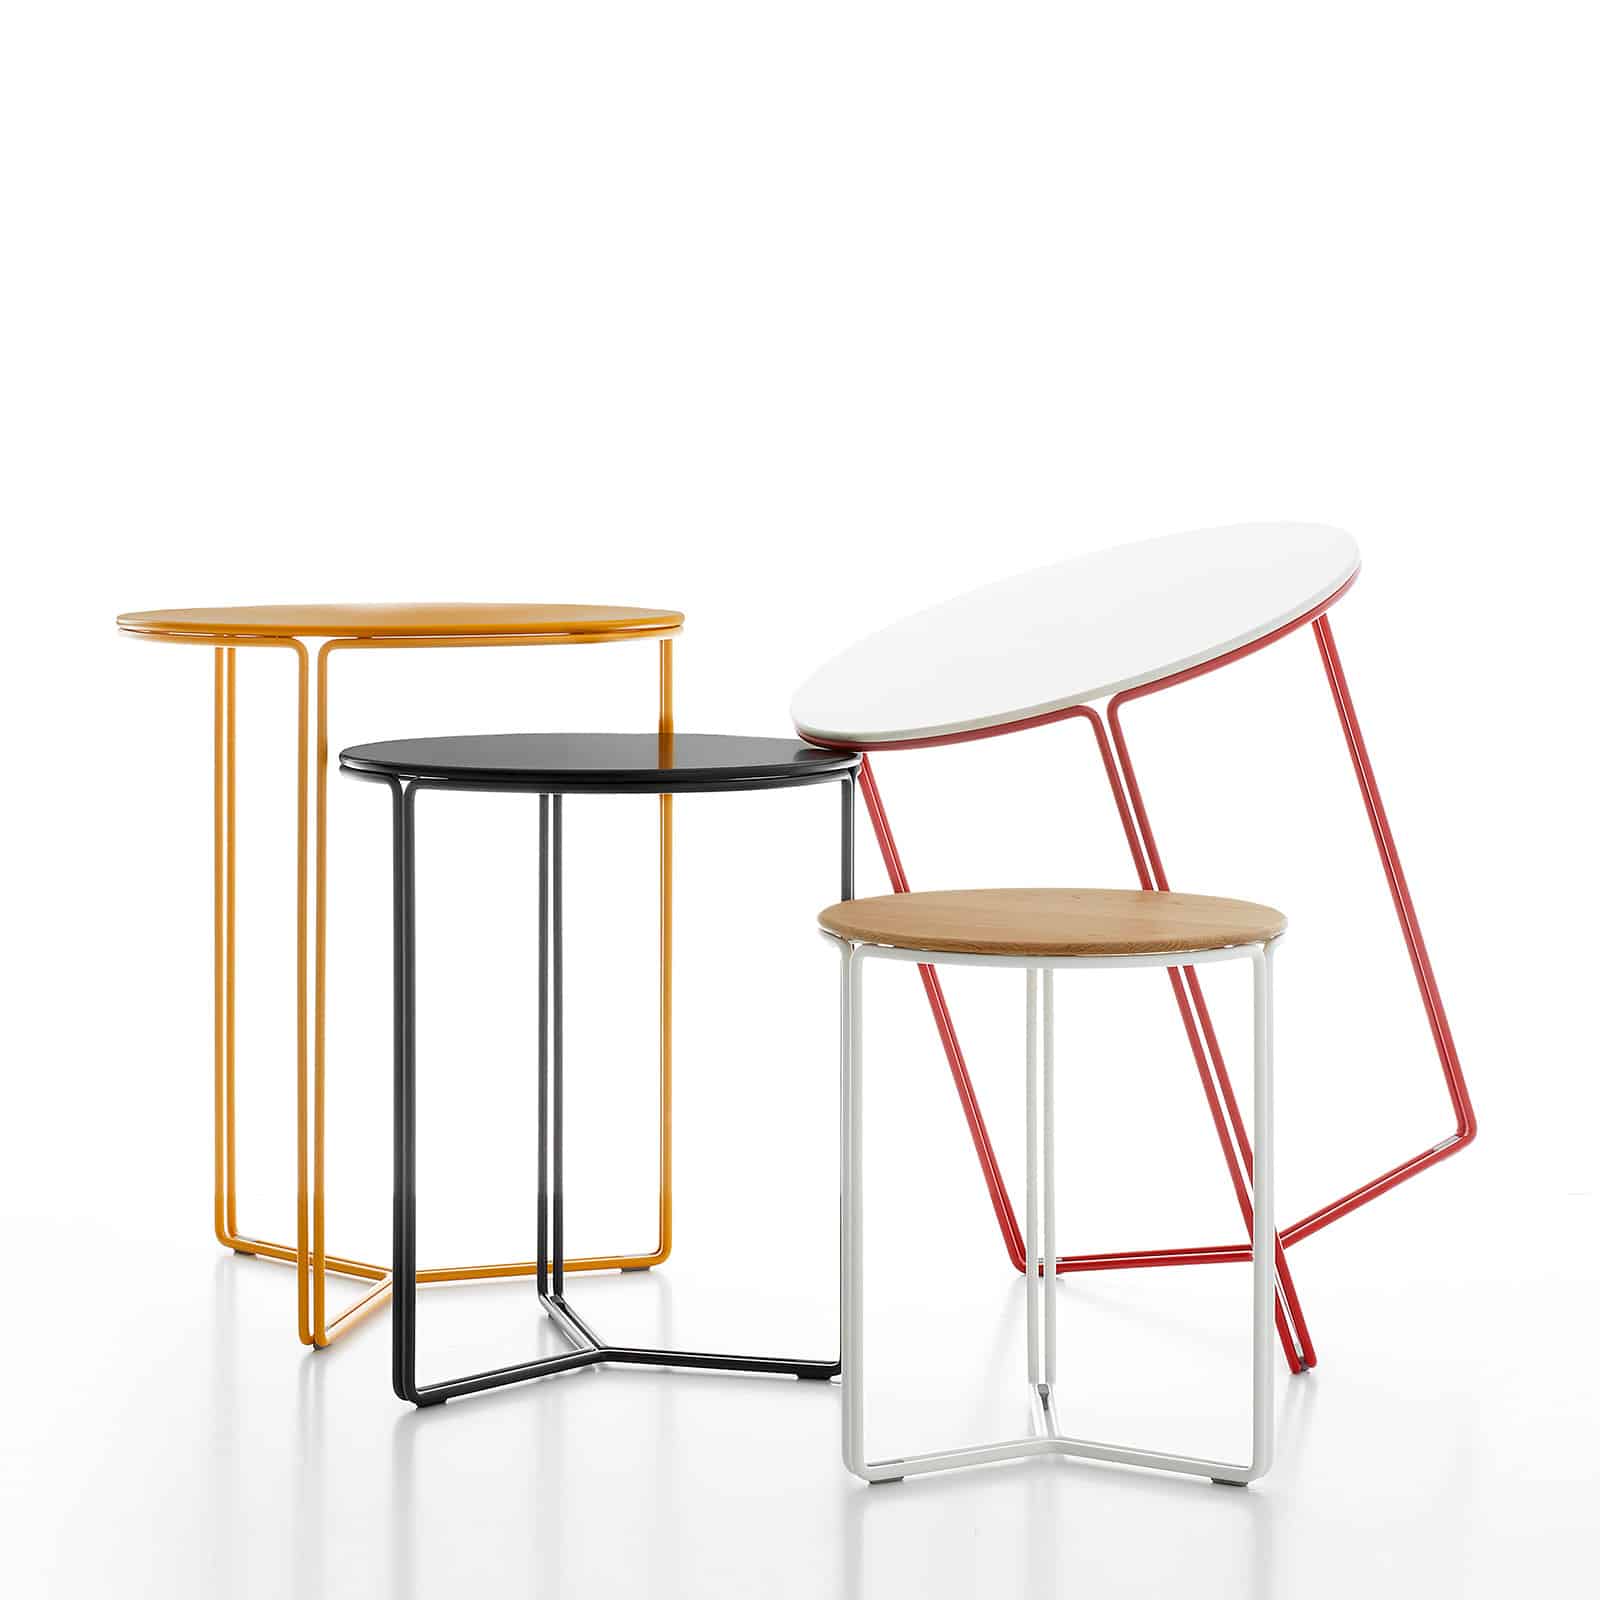 Stylex Adorn Series End-Tables come in great colors